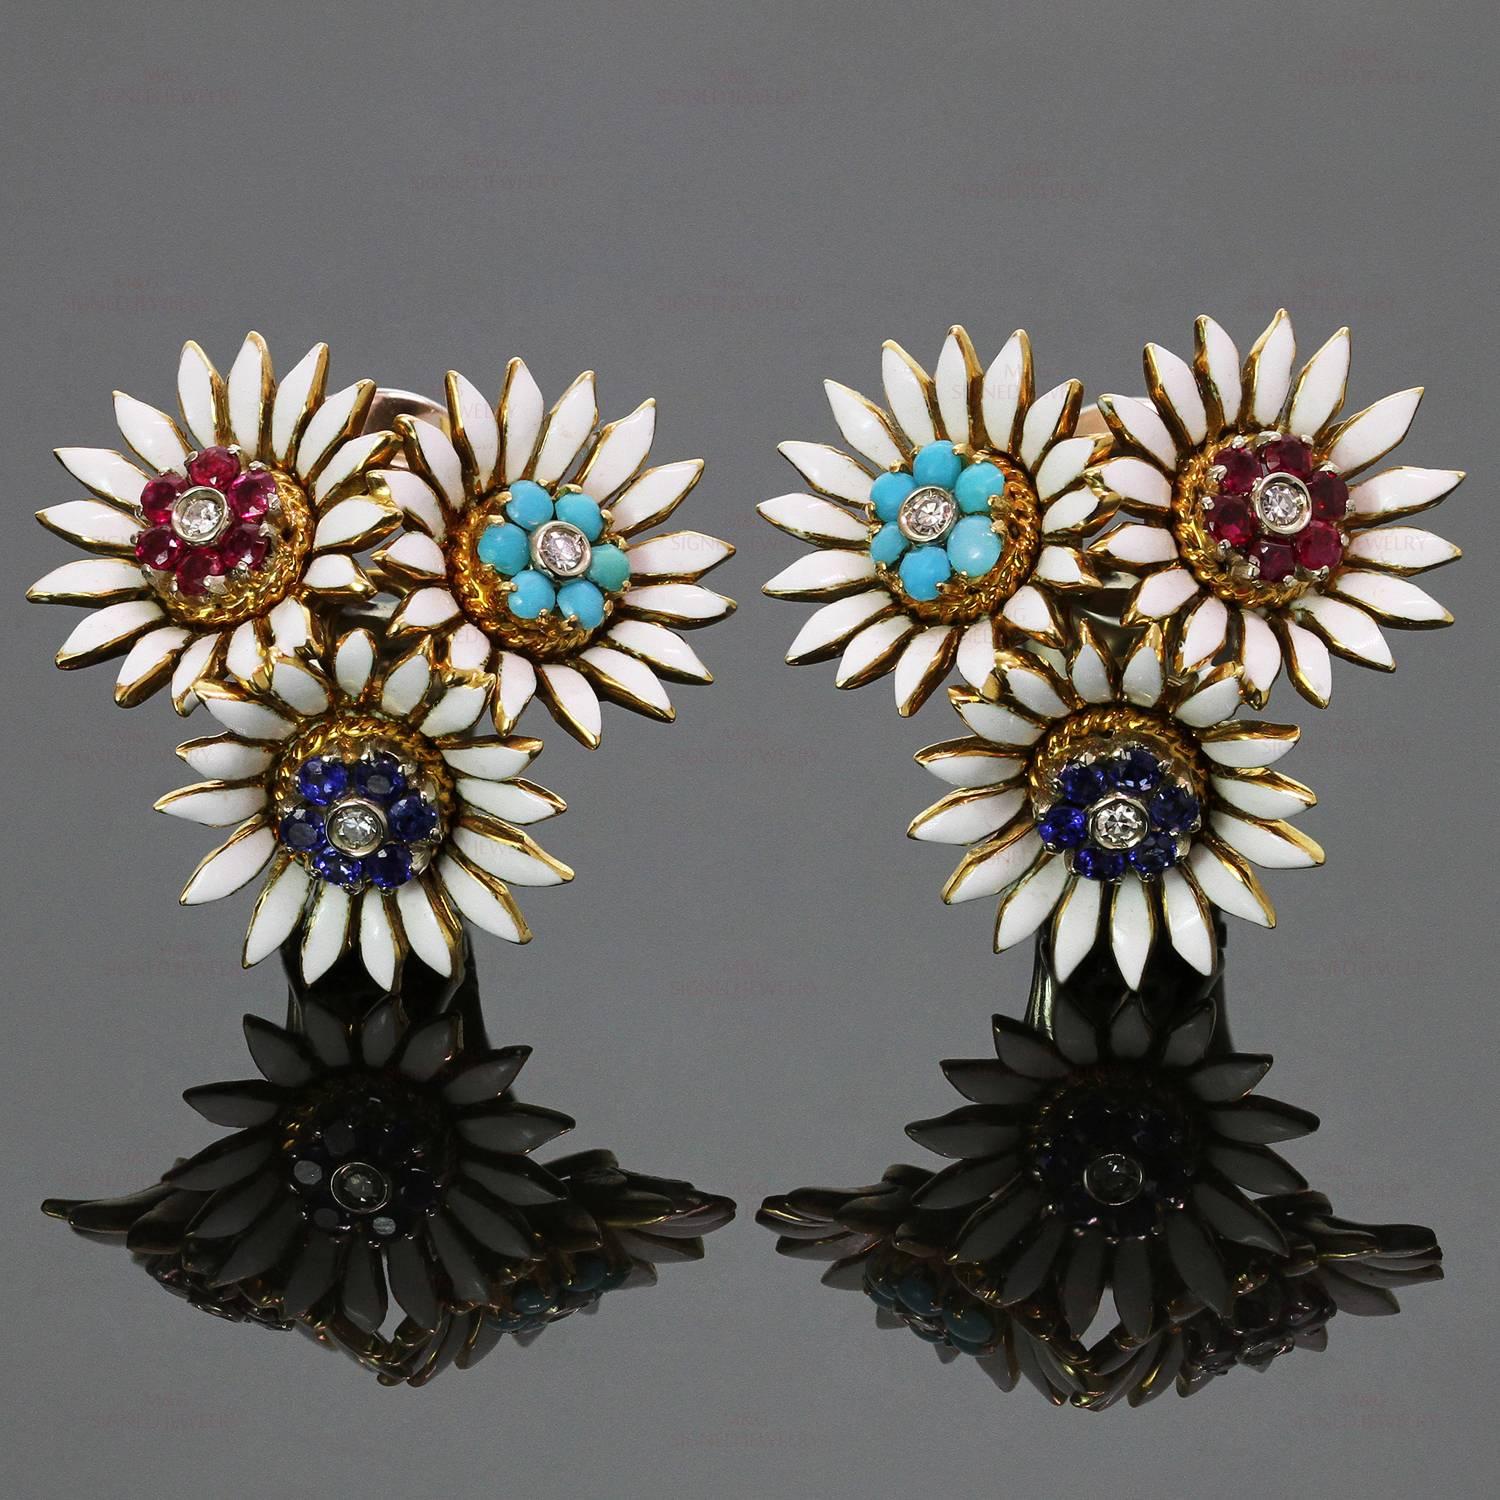 These vibrant retro clip-on earrings feature clusters of blossoming flowers with white enamel petals crafted in 18k yellow gold and set with 12 round cabochon turquoises, 12 mixed-cut round sapphires, 12 mixed-cut round rubies and 6 brilliant-cut